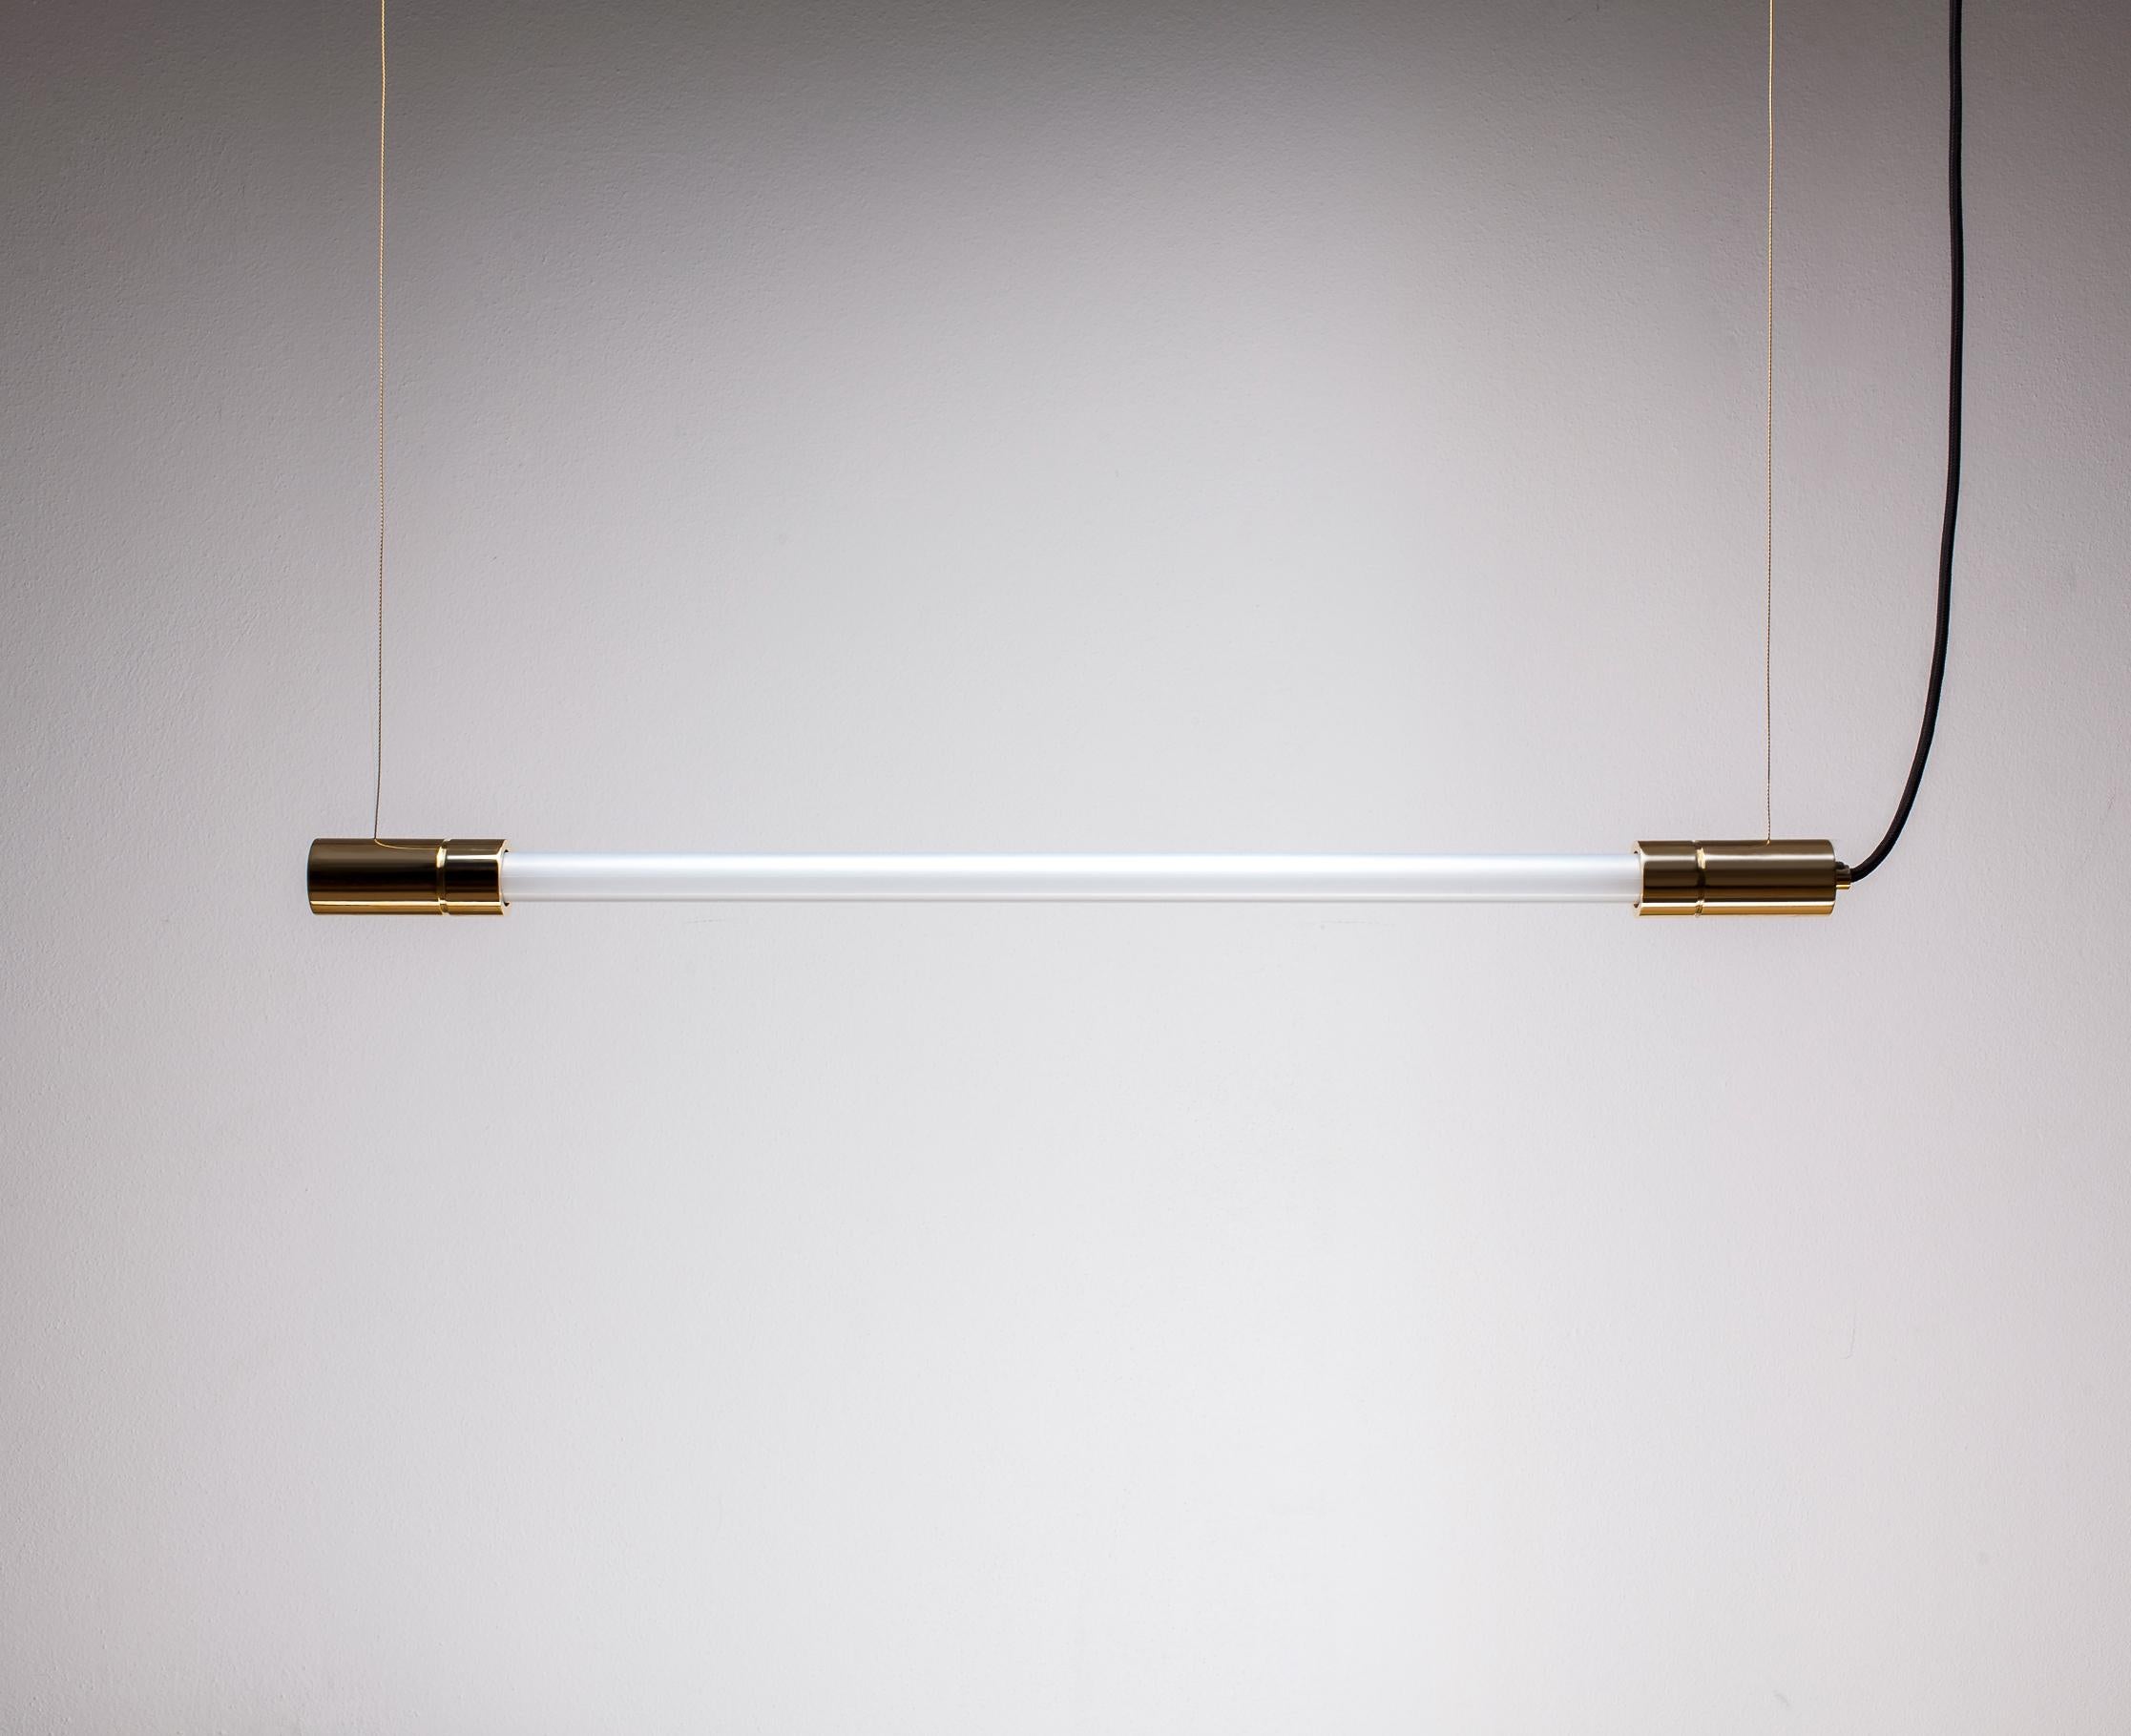 Acra solid brass suspended light by Lexavala.
Dimensions: D 4 x H 95 cm 
Materials: brass, glass.

Available in one shape of the socket but in two materials options. Different size means different lengths of the fluorescent lamp.

Hello! My